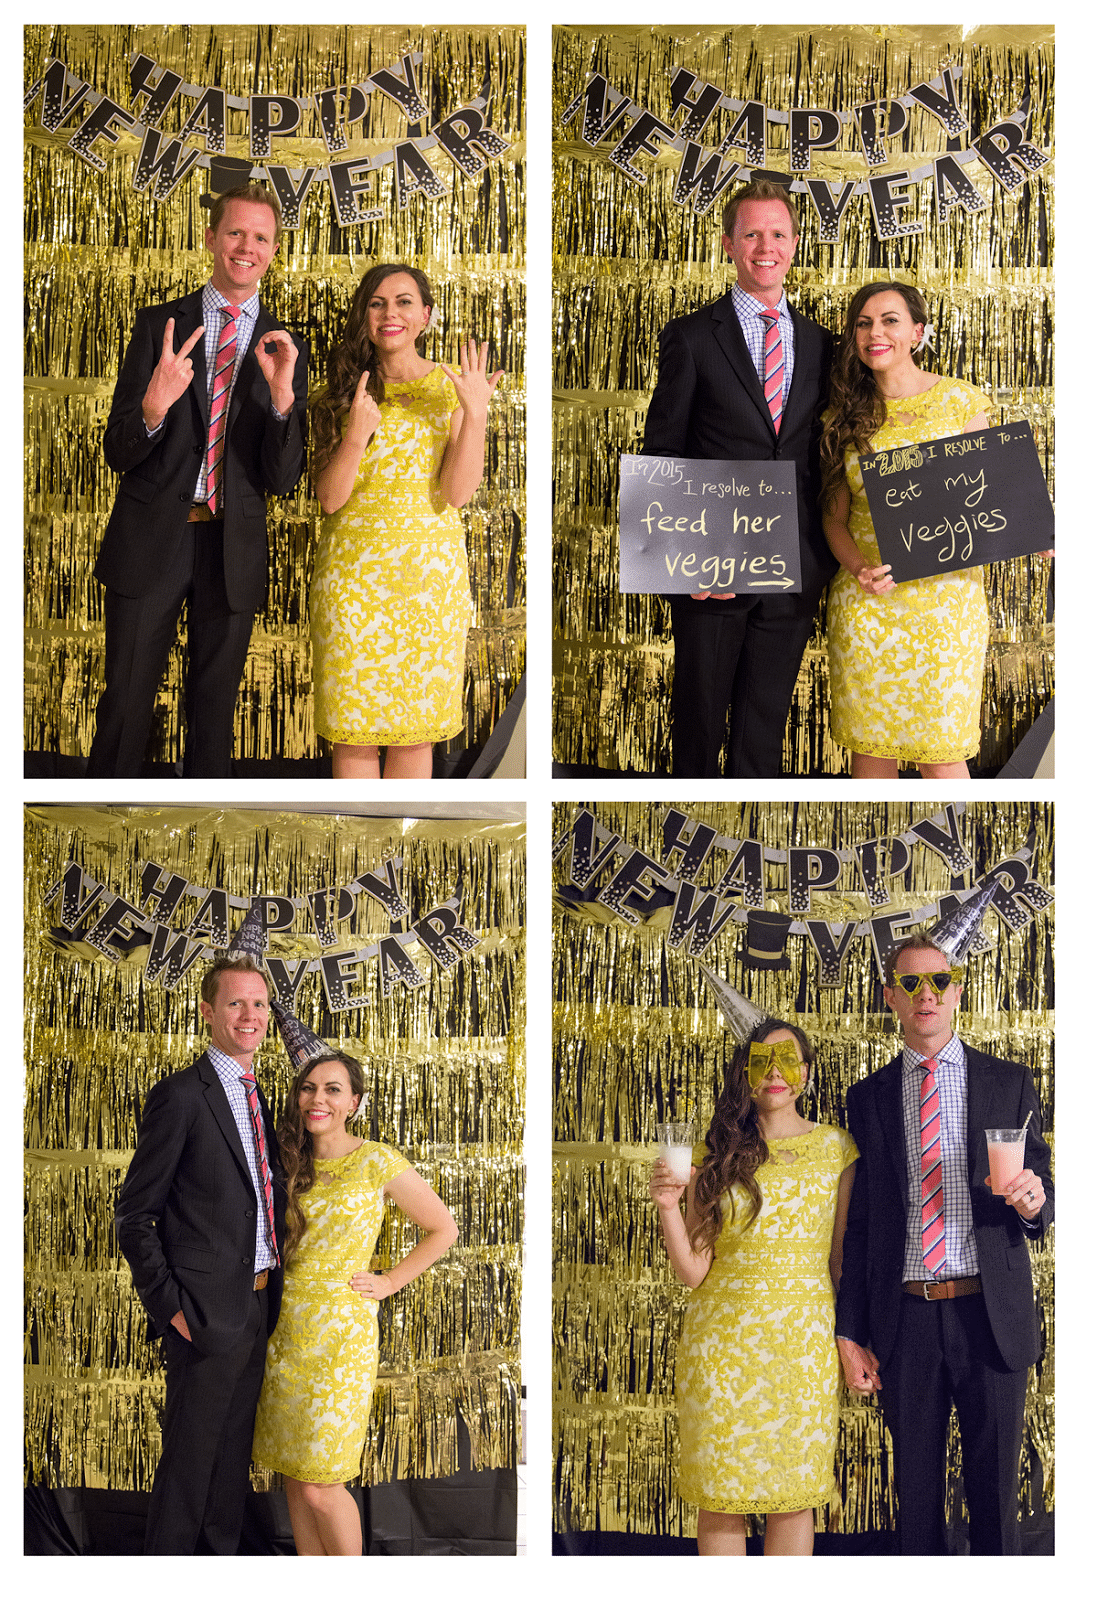 New Year's Eve Photo Booth Ideas. 